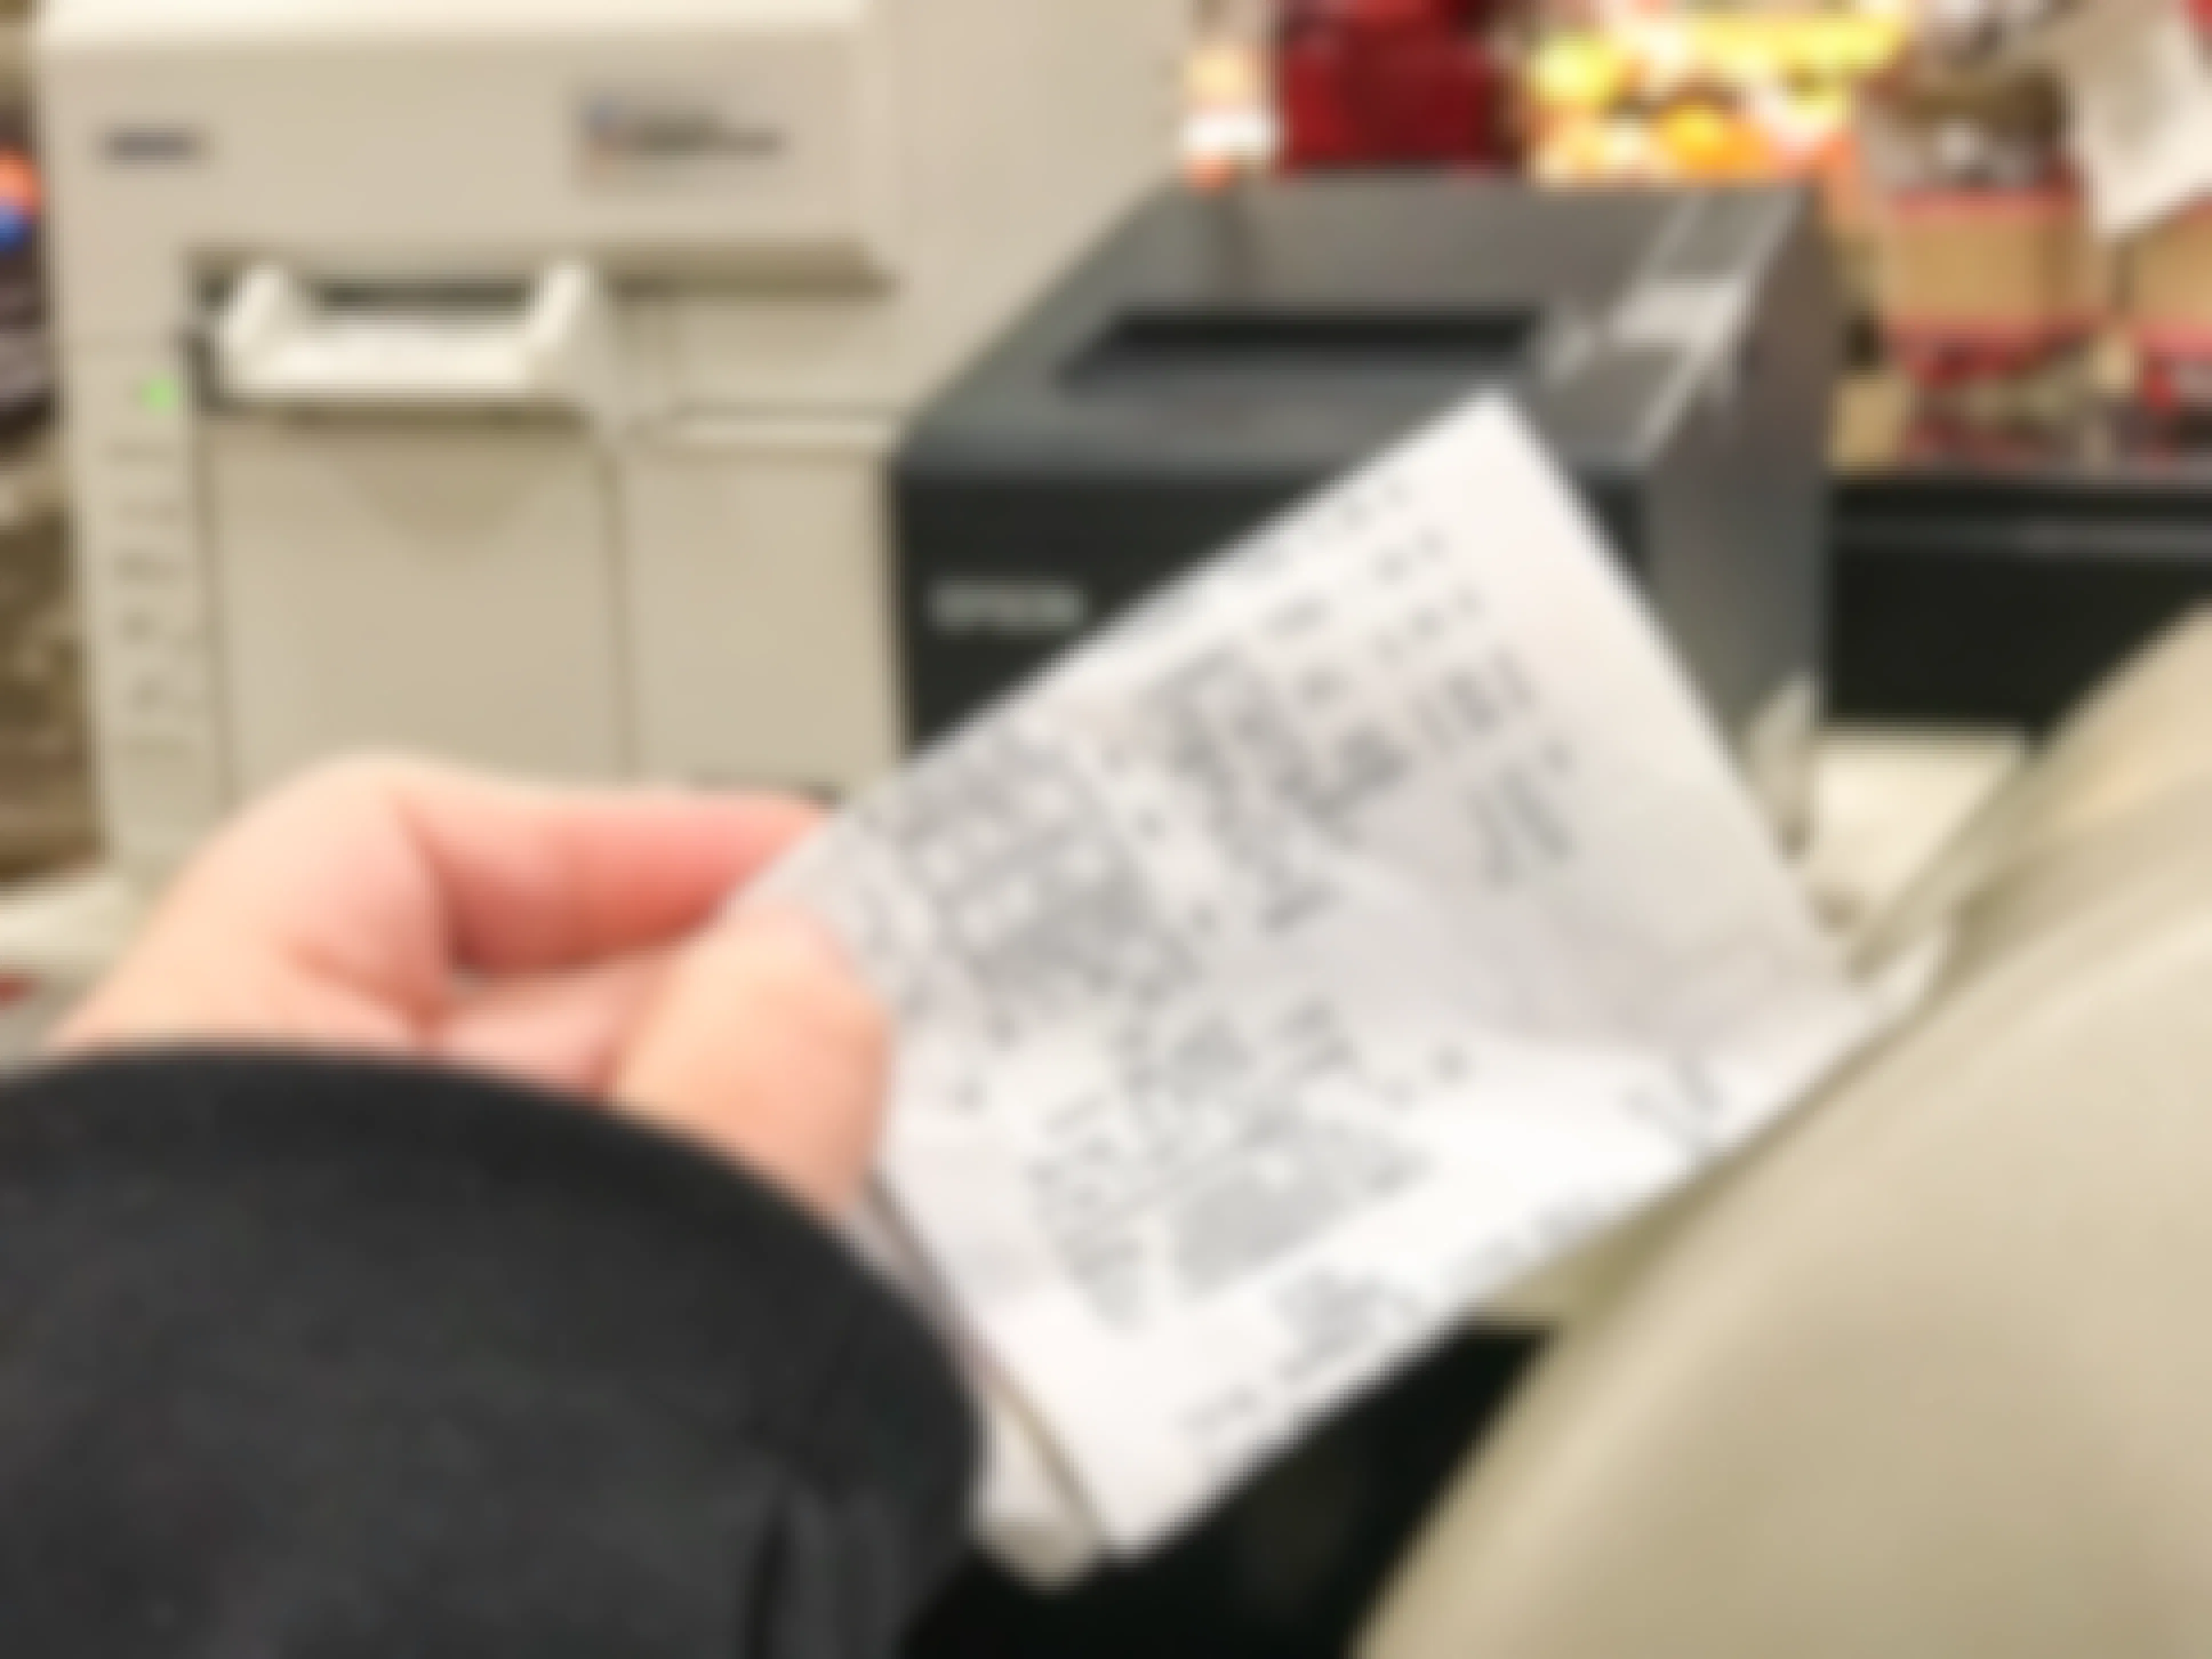 Someone checking their receipt in a store